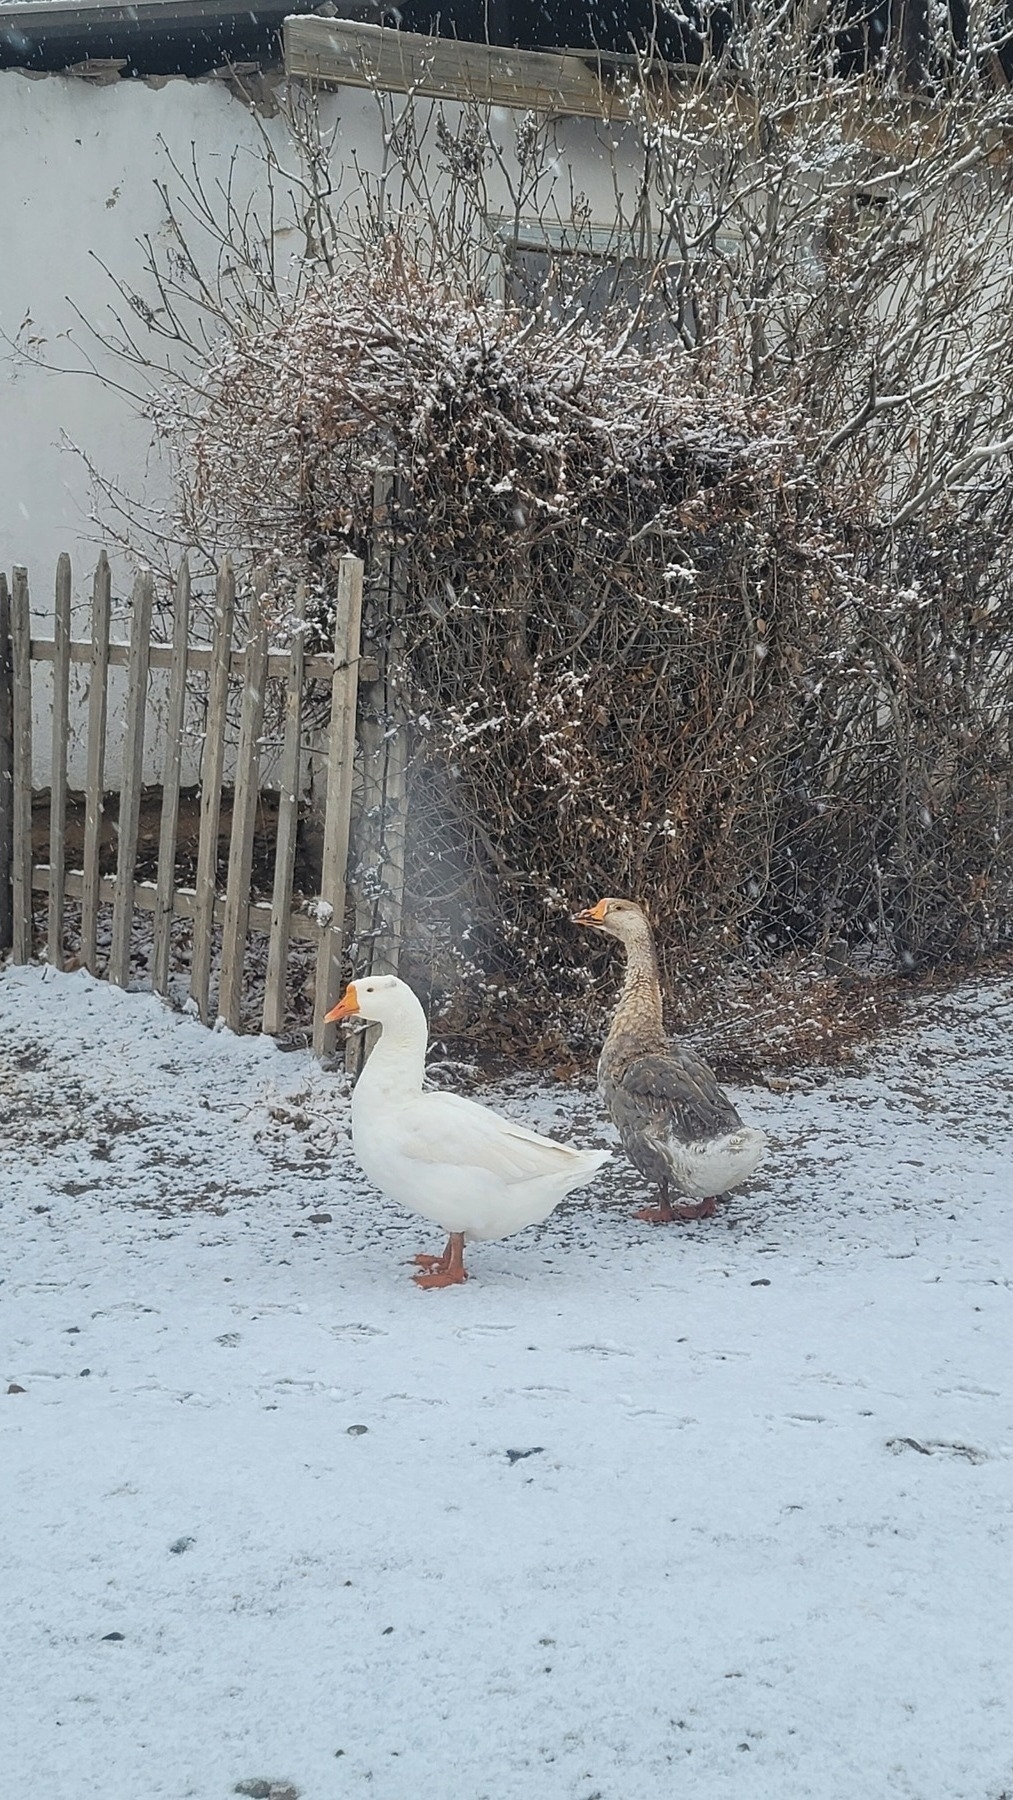 two geese on snow covered ground, small tree behind with some snow on the branches, all in front of a house